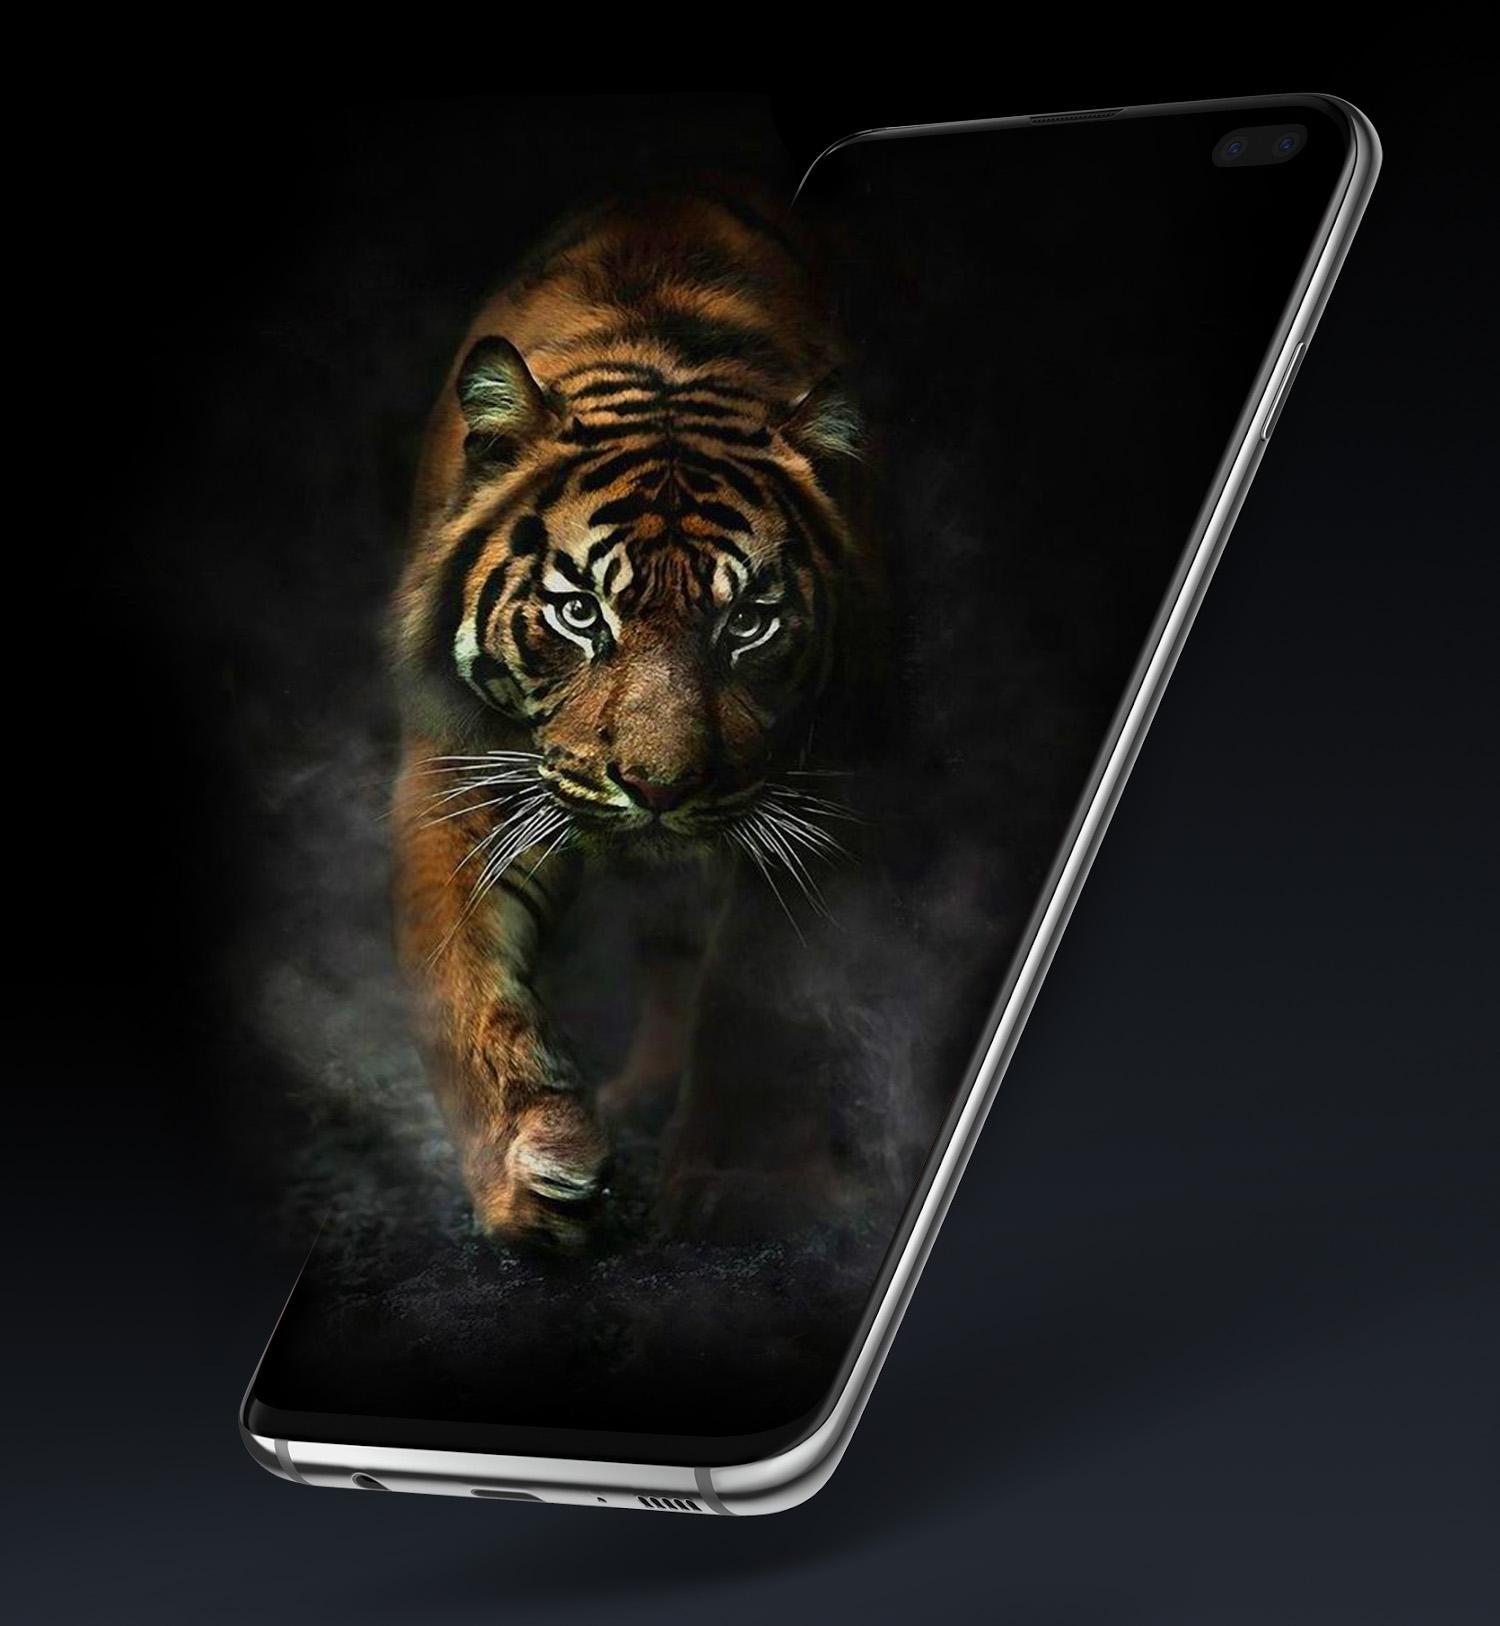 3D Effect Live Wallpaper / Canvas Live Wallpapers 3d Hd By Athina ...